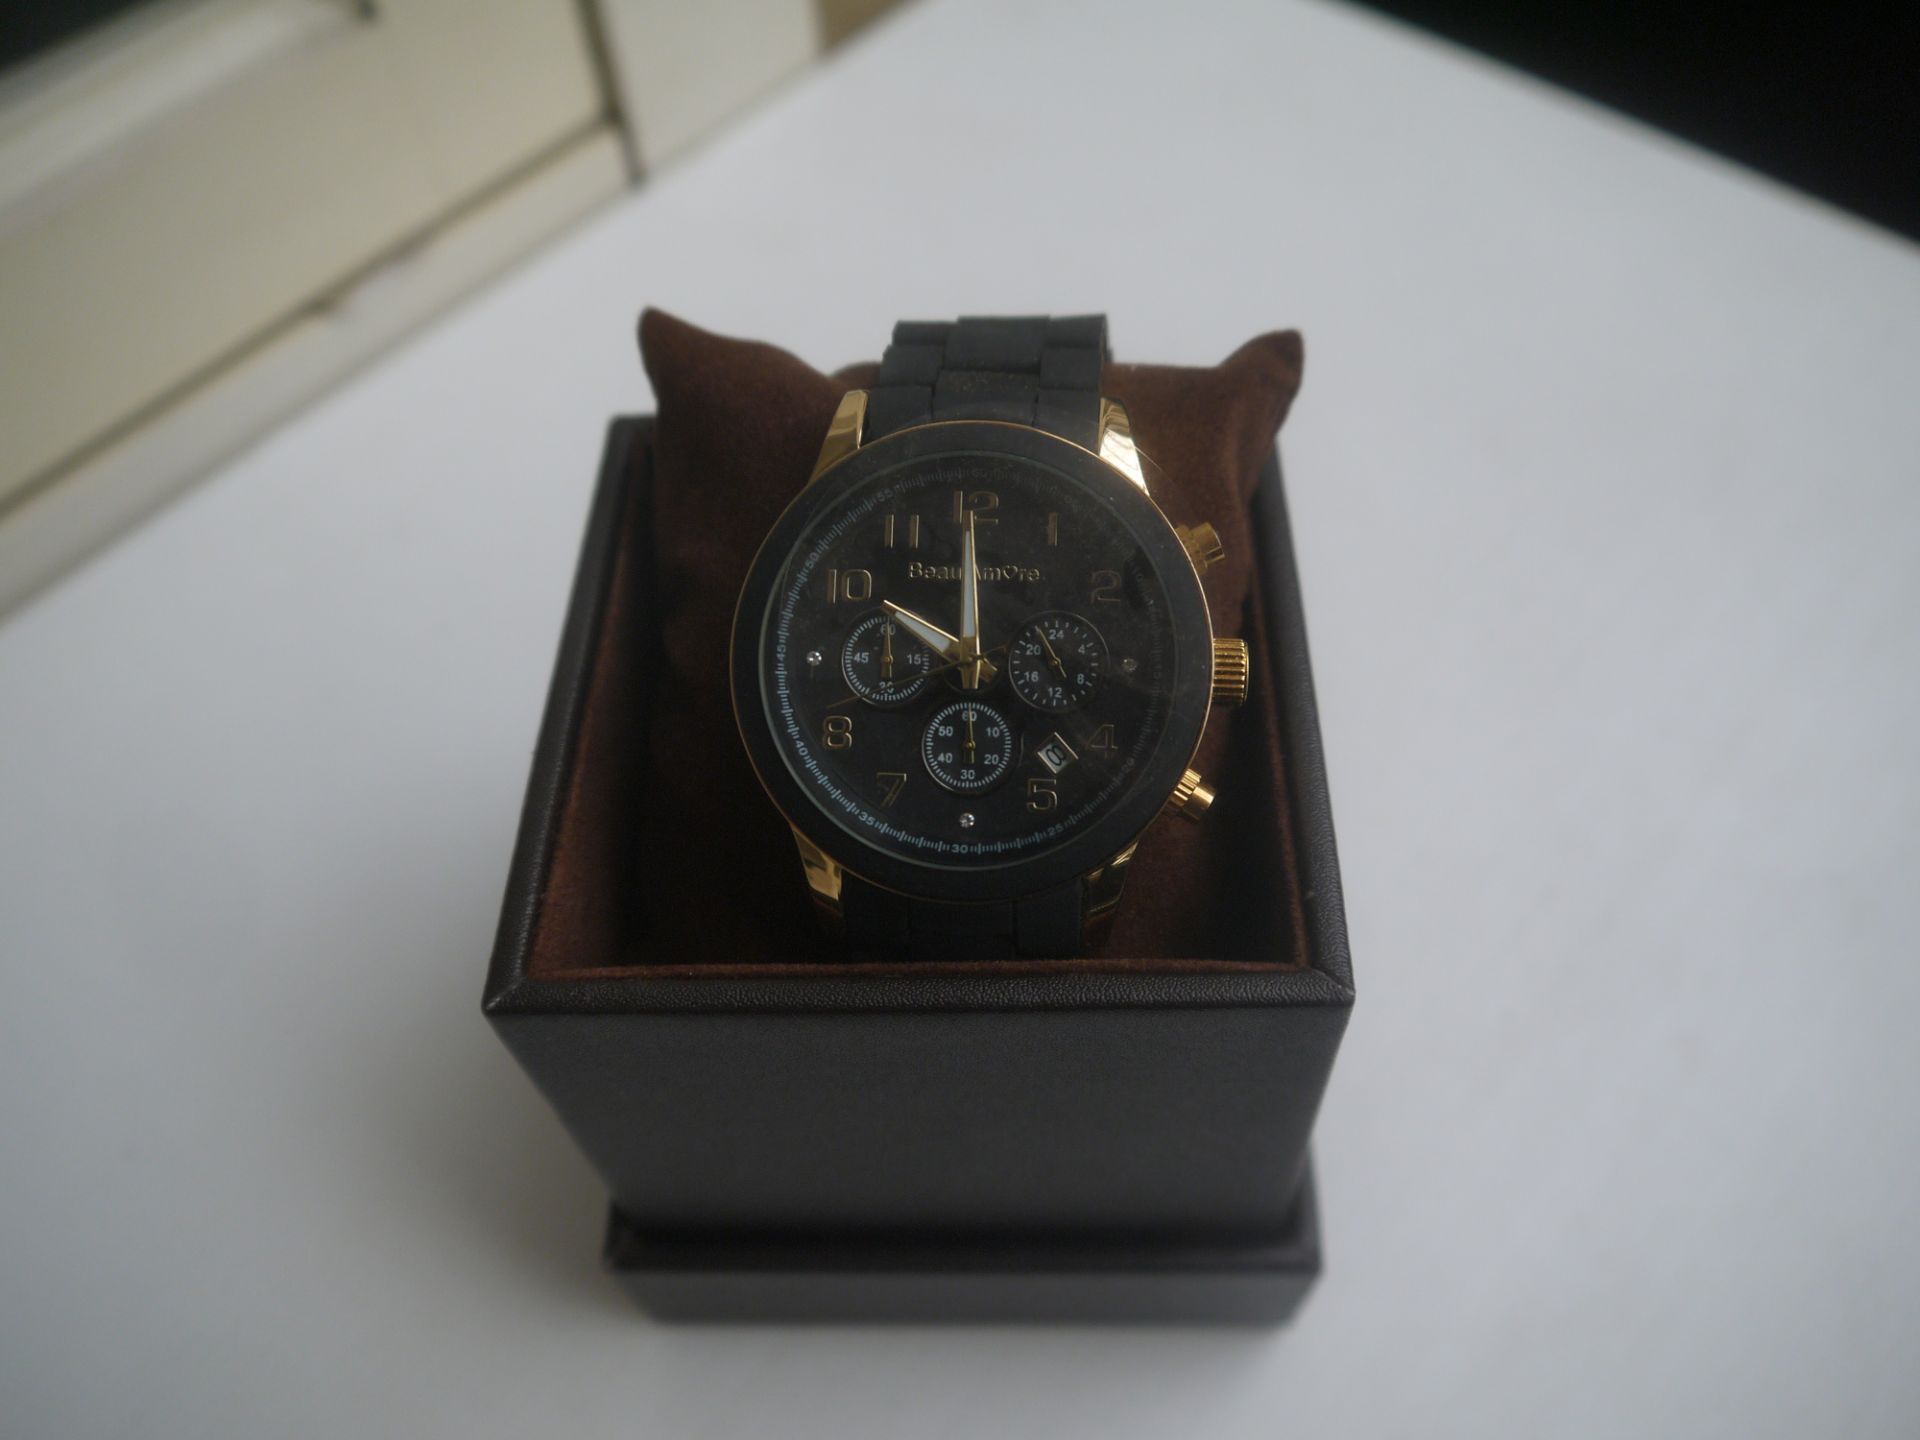 NO VAT!!! Beau Amore Designer Black and Gold watch in the style of the Michael Kors classic. New,